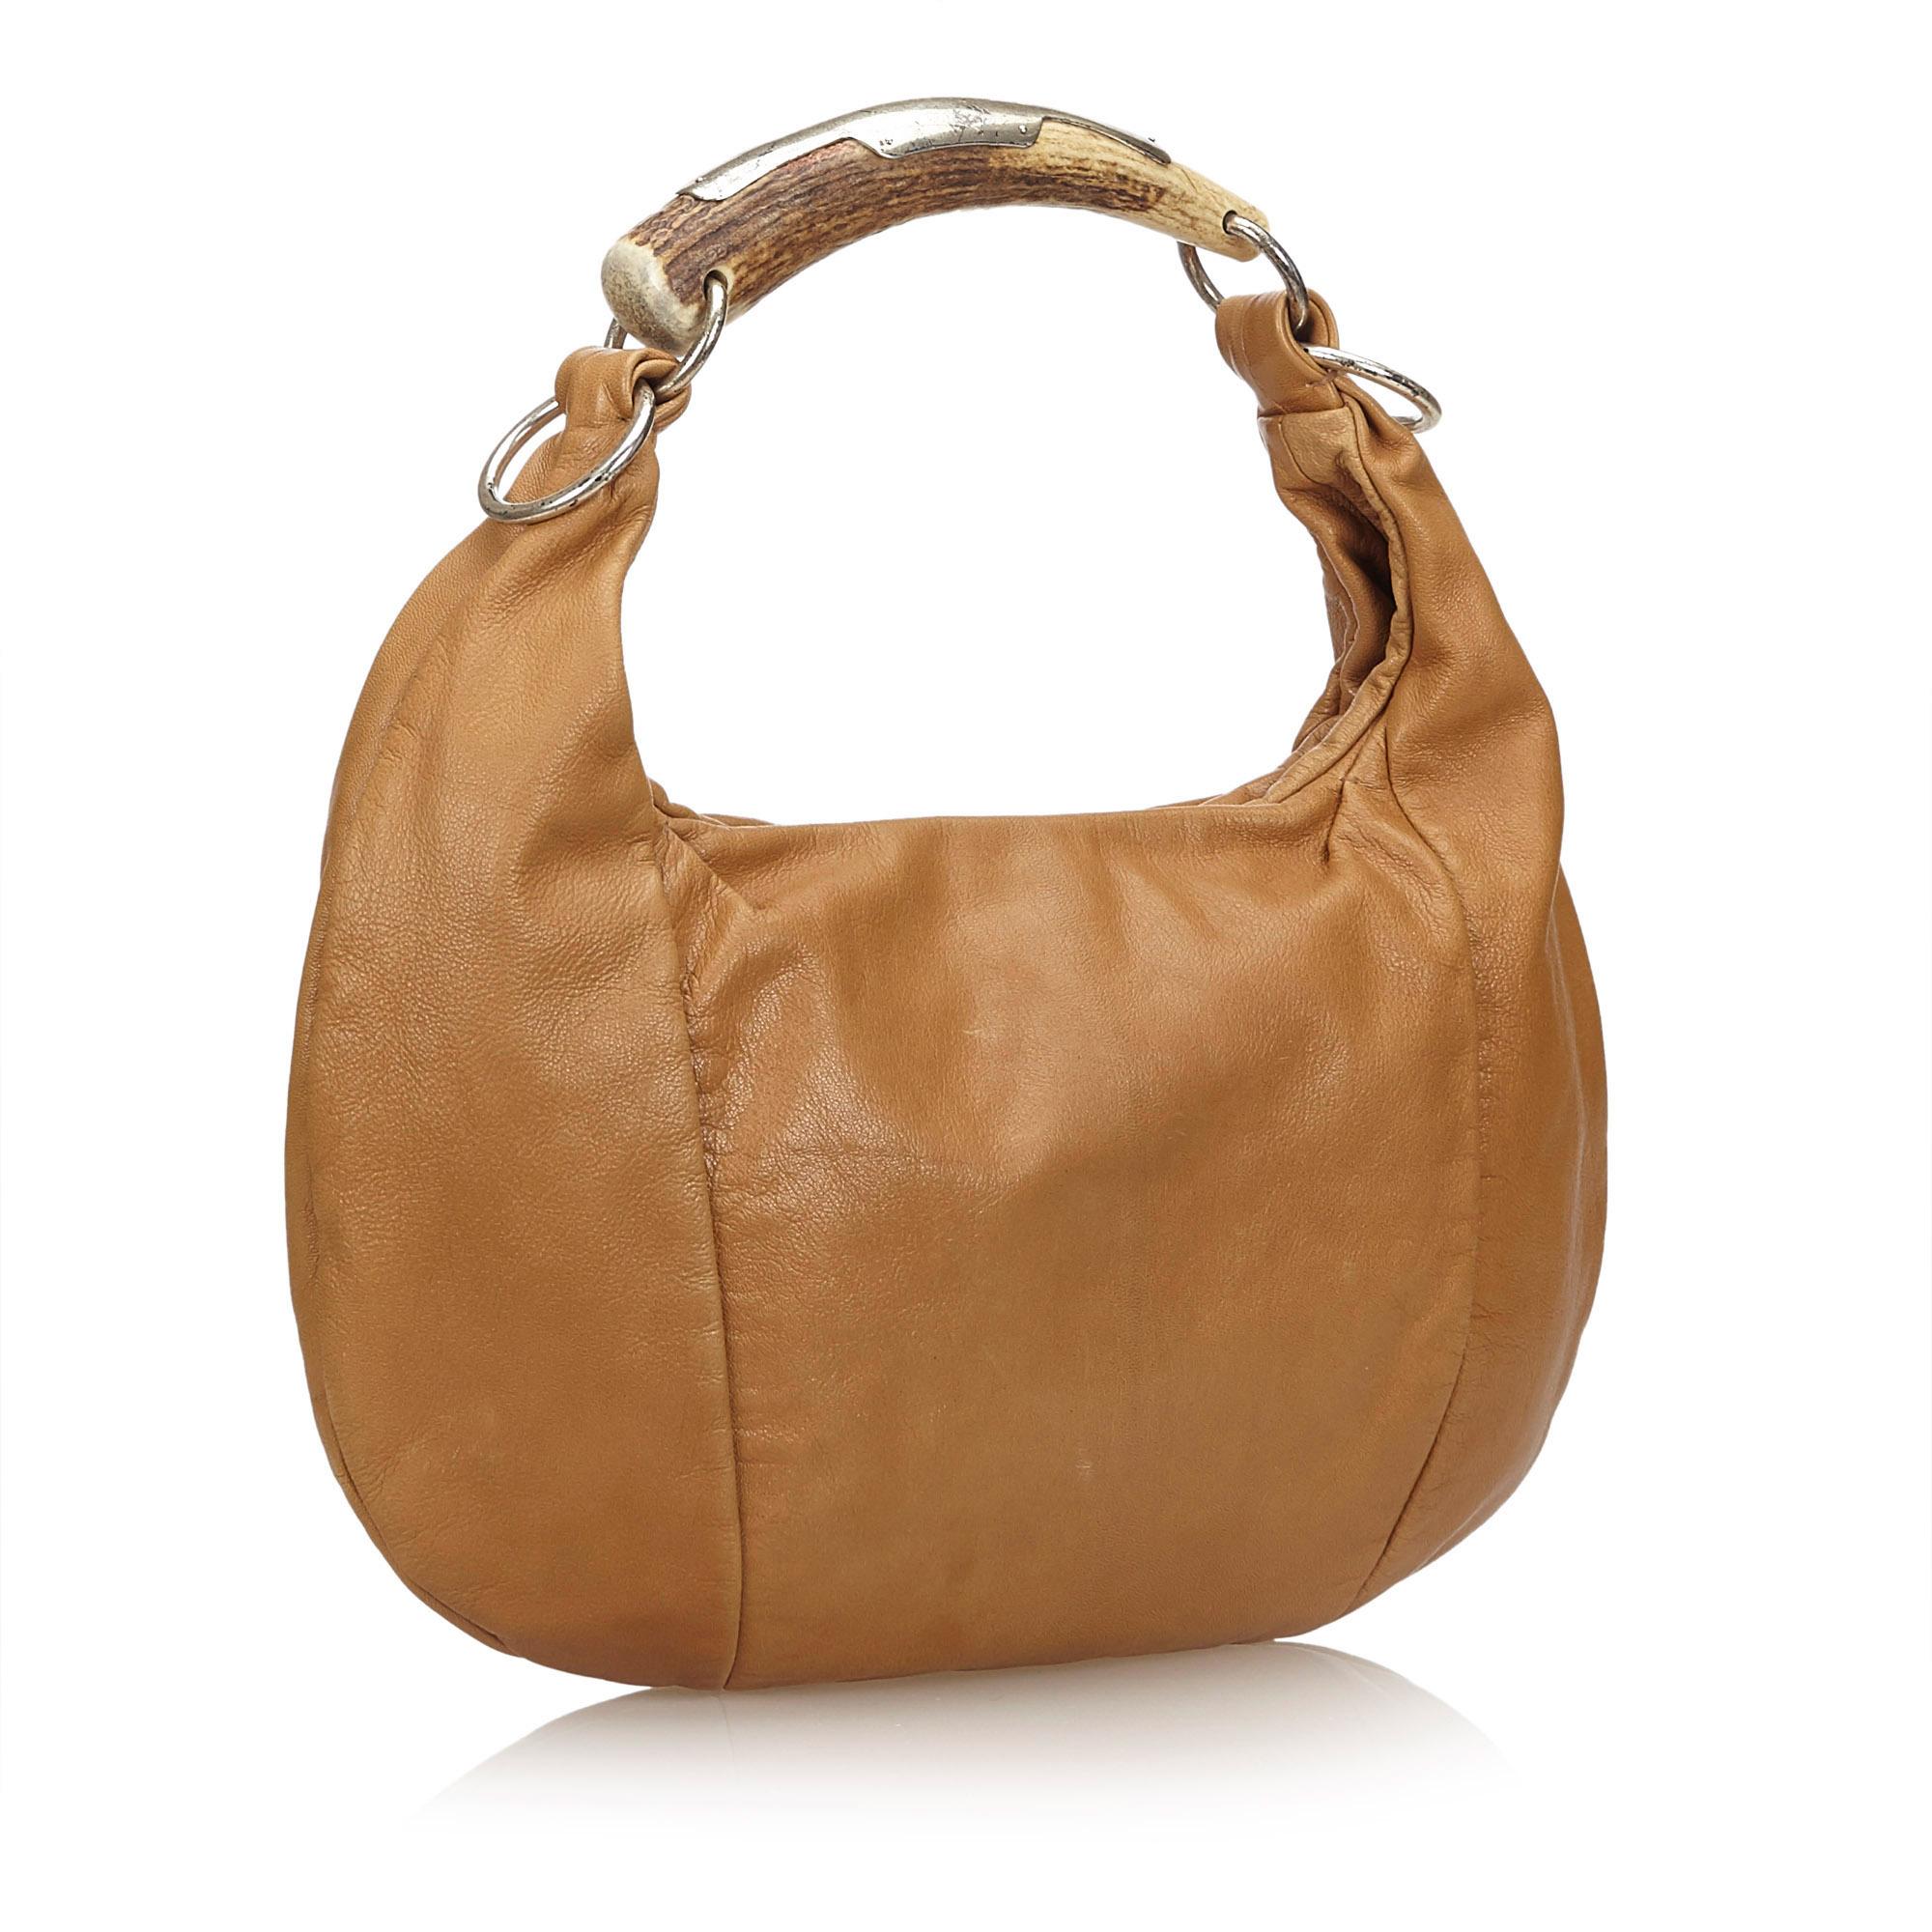 This bag features a leather body, wooden handle, flat leather strap, top zip closure, and interior zip and slip pocket. It carries as B condition rating.

Inclusions: 
This item does not come with inclusions.

Dimensions:
Length: 24.00 cm
Width: